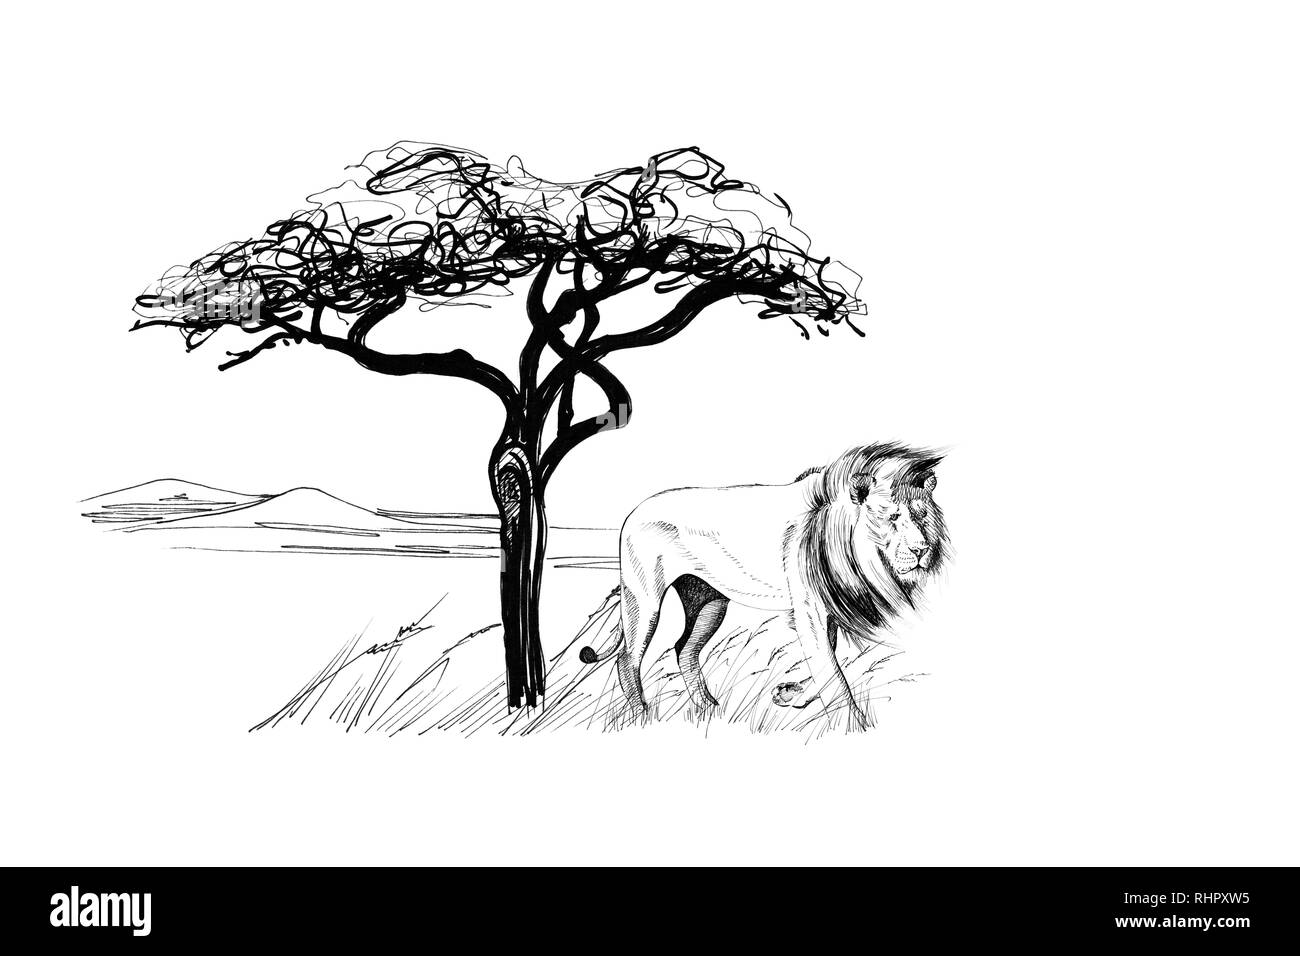 Lion male near a tree in africa. Hand drawn illustration. Collection of hand drawn illustrations (originals, no tracing) Stock Photo